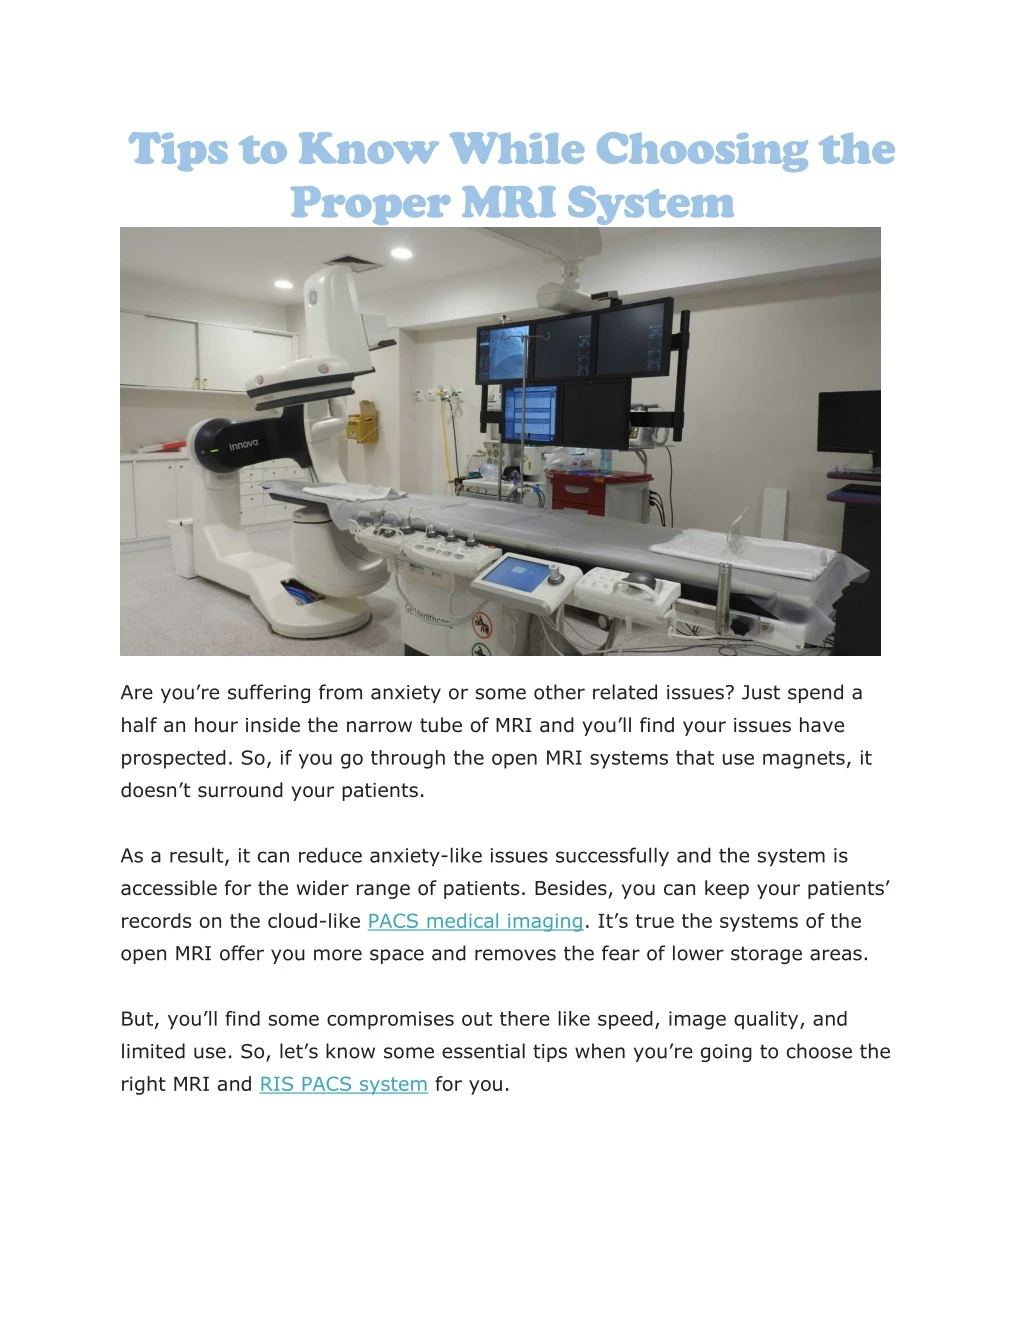 tips to know while choosing the proper mri system